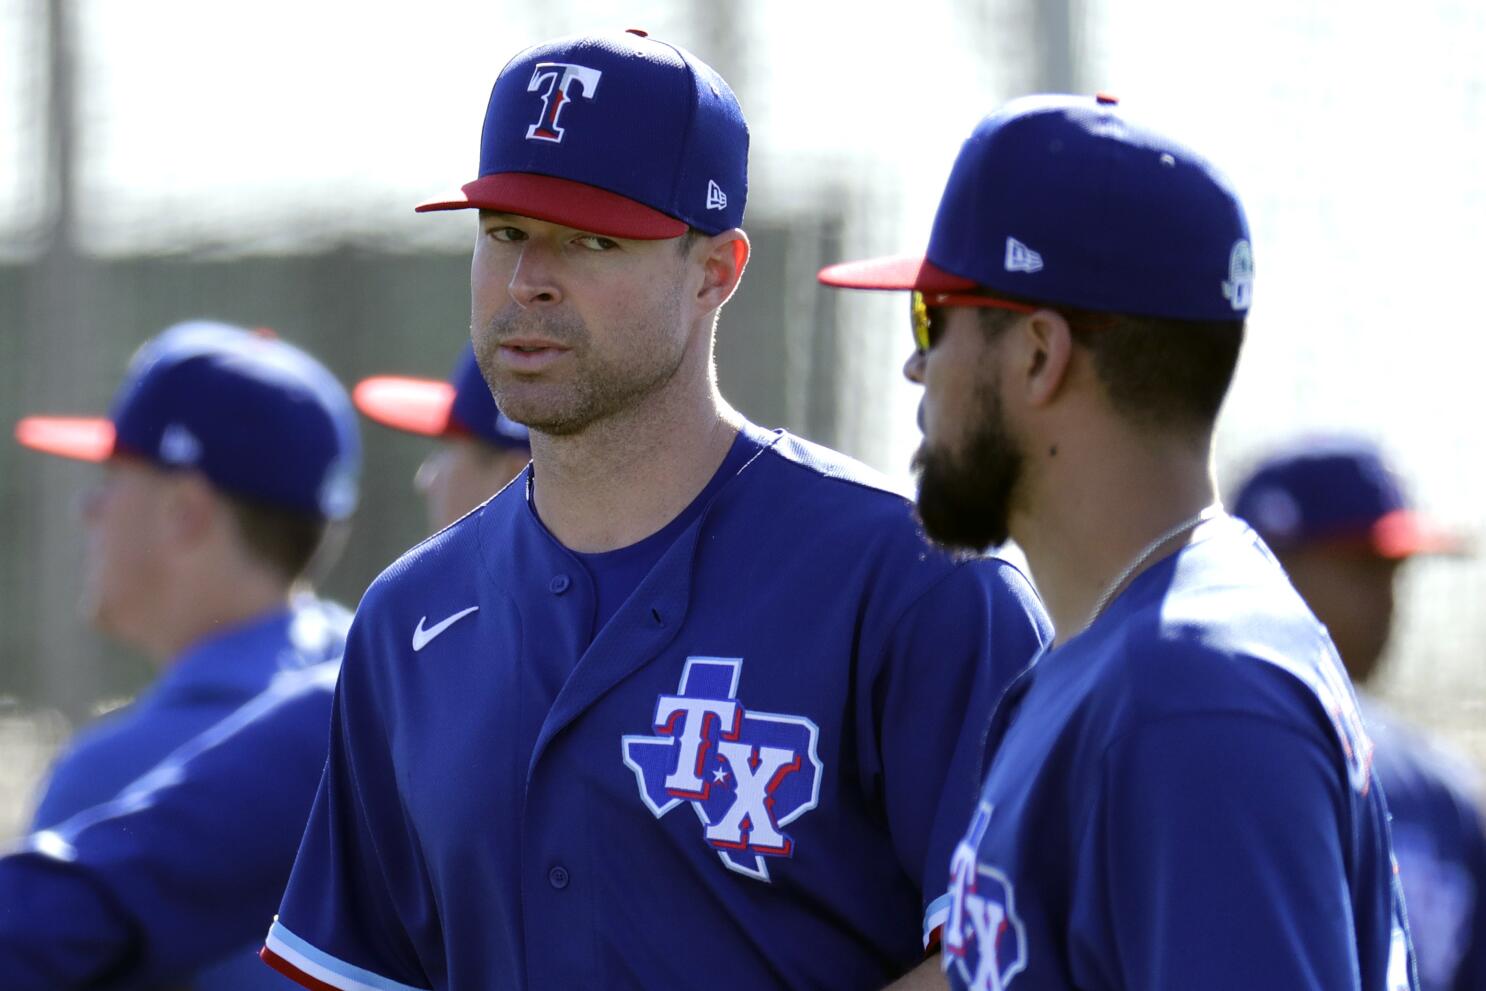 Rangers' Kluber pitches for 1st time since broken arm